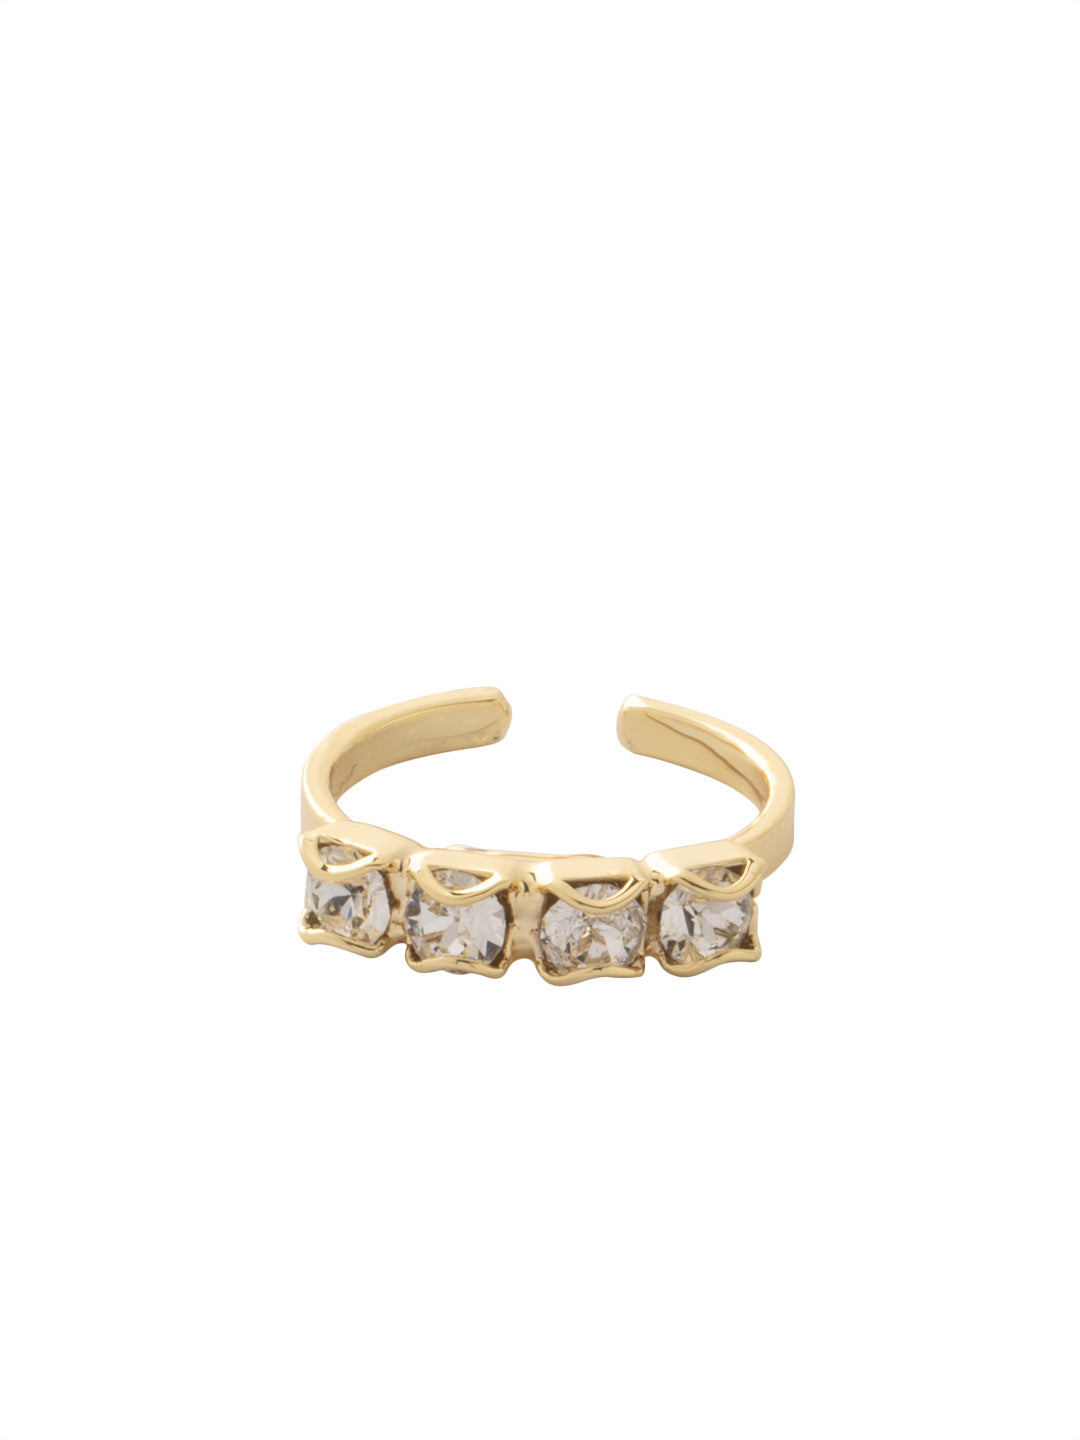 Jane Band Ring - RFM55BGCRY - <p>The Jane Band Ring features a row of four round cut crystals on an adjustable band. From Sorrelli's Crystal collection in our Bright Gold-tone finish.</p>